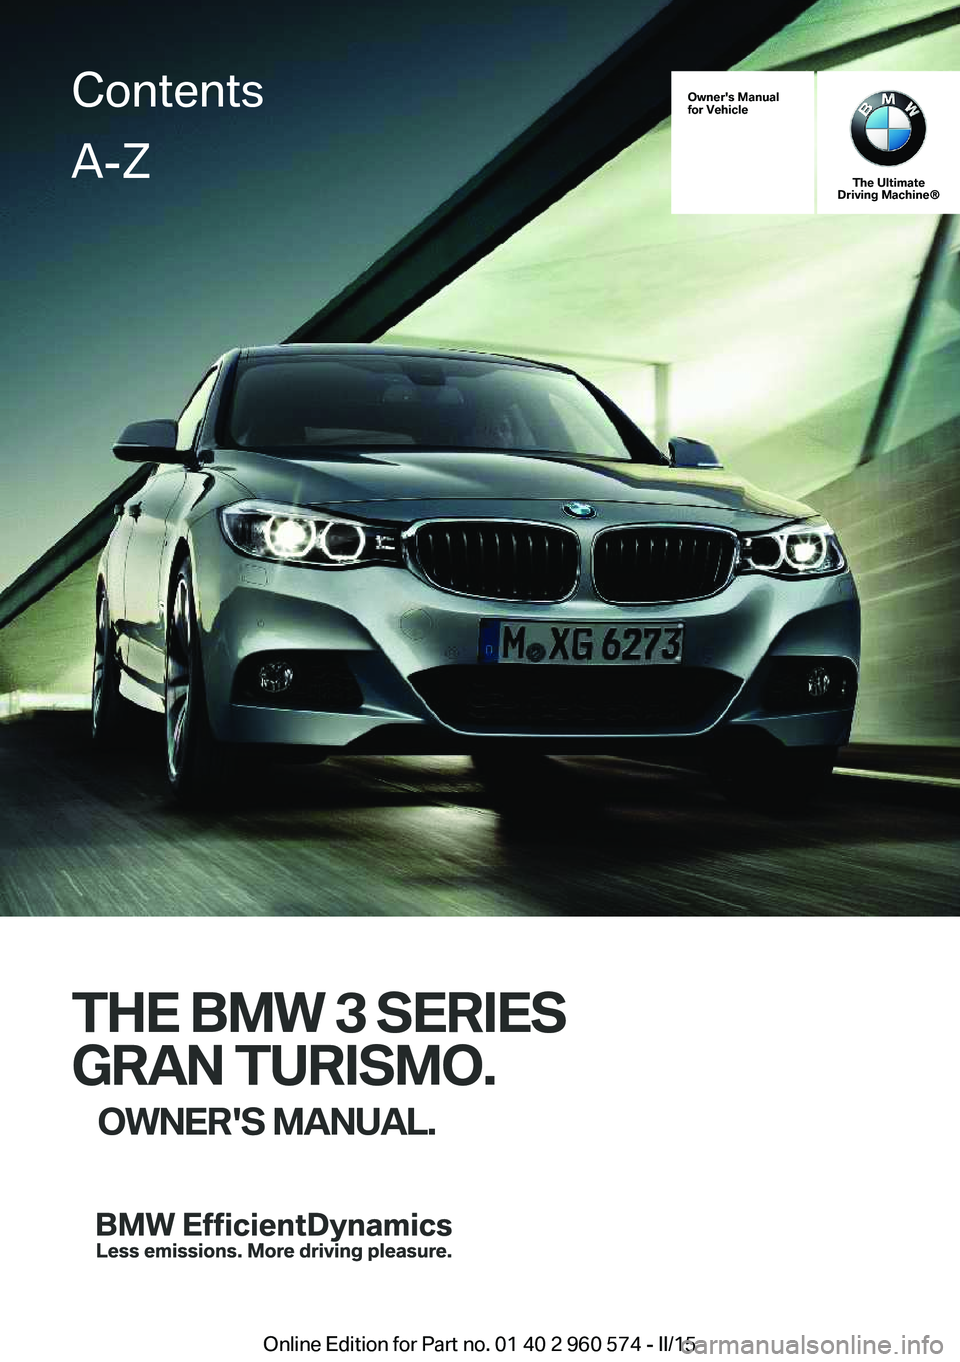 BMW 335I XDRIVE GRAN TURISMO 2015  Owners Manual Owner's Manual
for Vehicle
The Ultimate
Driving Machine®
THE BMW 3 SERIES
GRAN TURISMO. OWNER'S MANUAL.
ContentsA-Z
Online Edition for Part no. 01 40 2 960 574 - II/15   